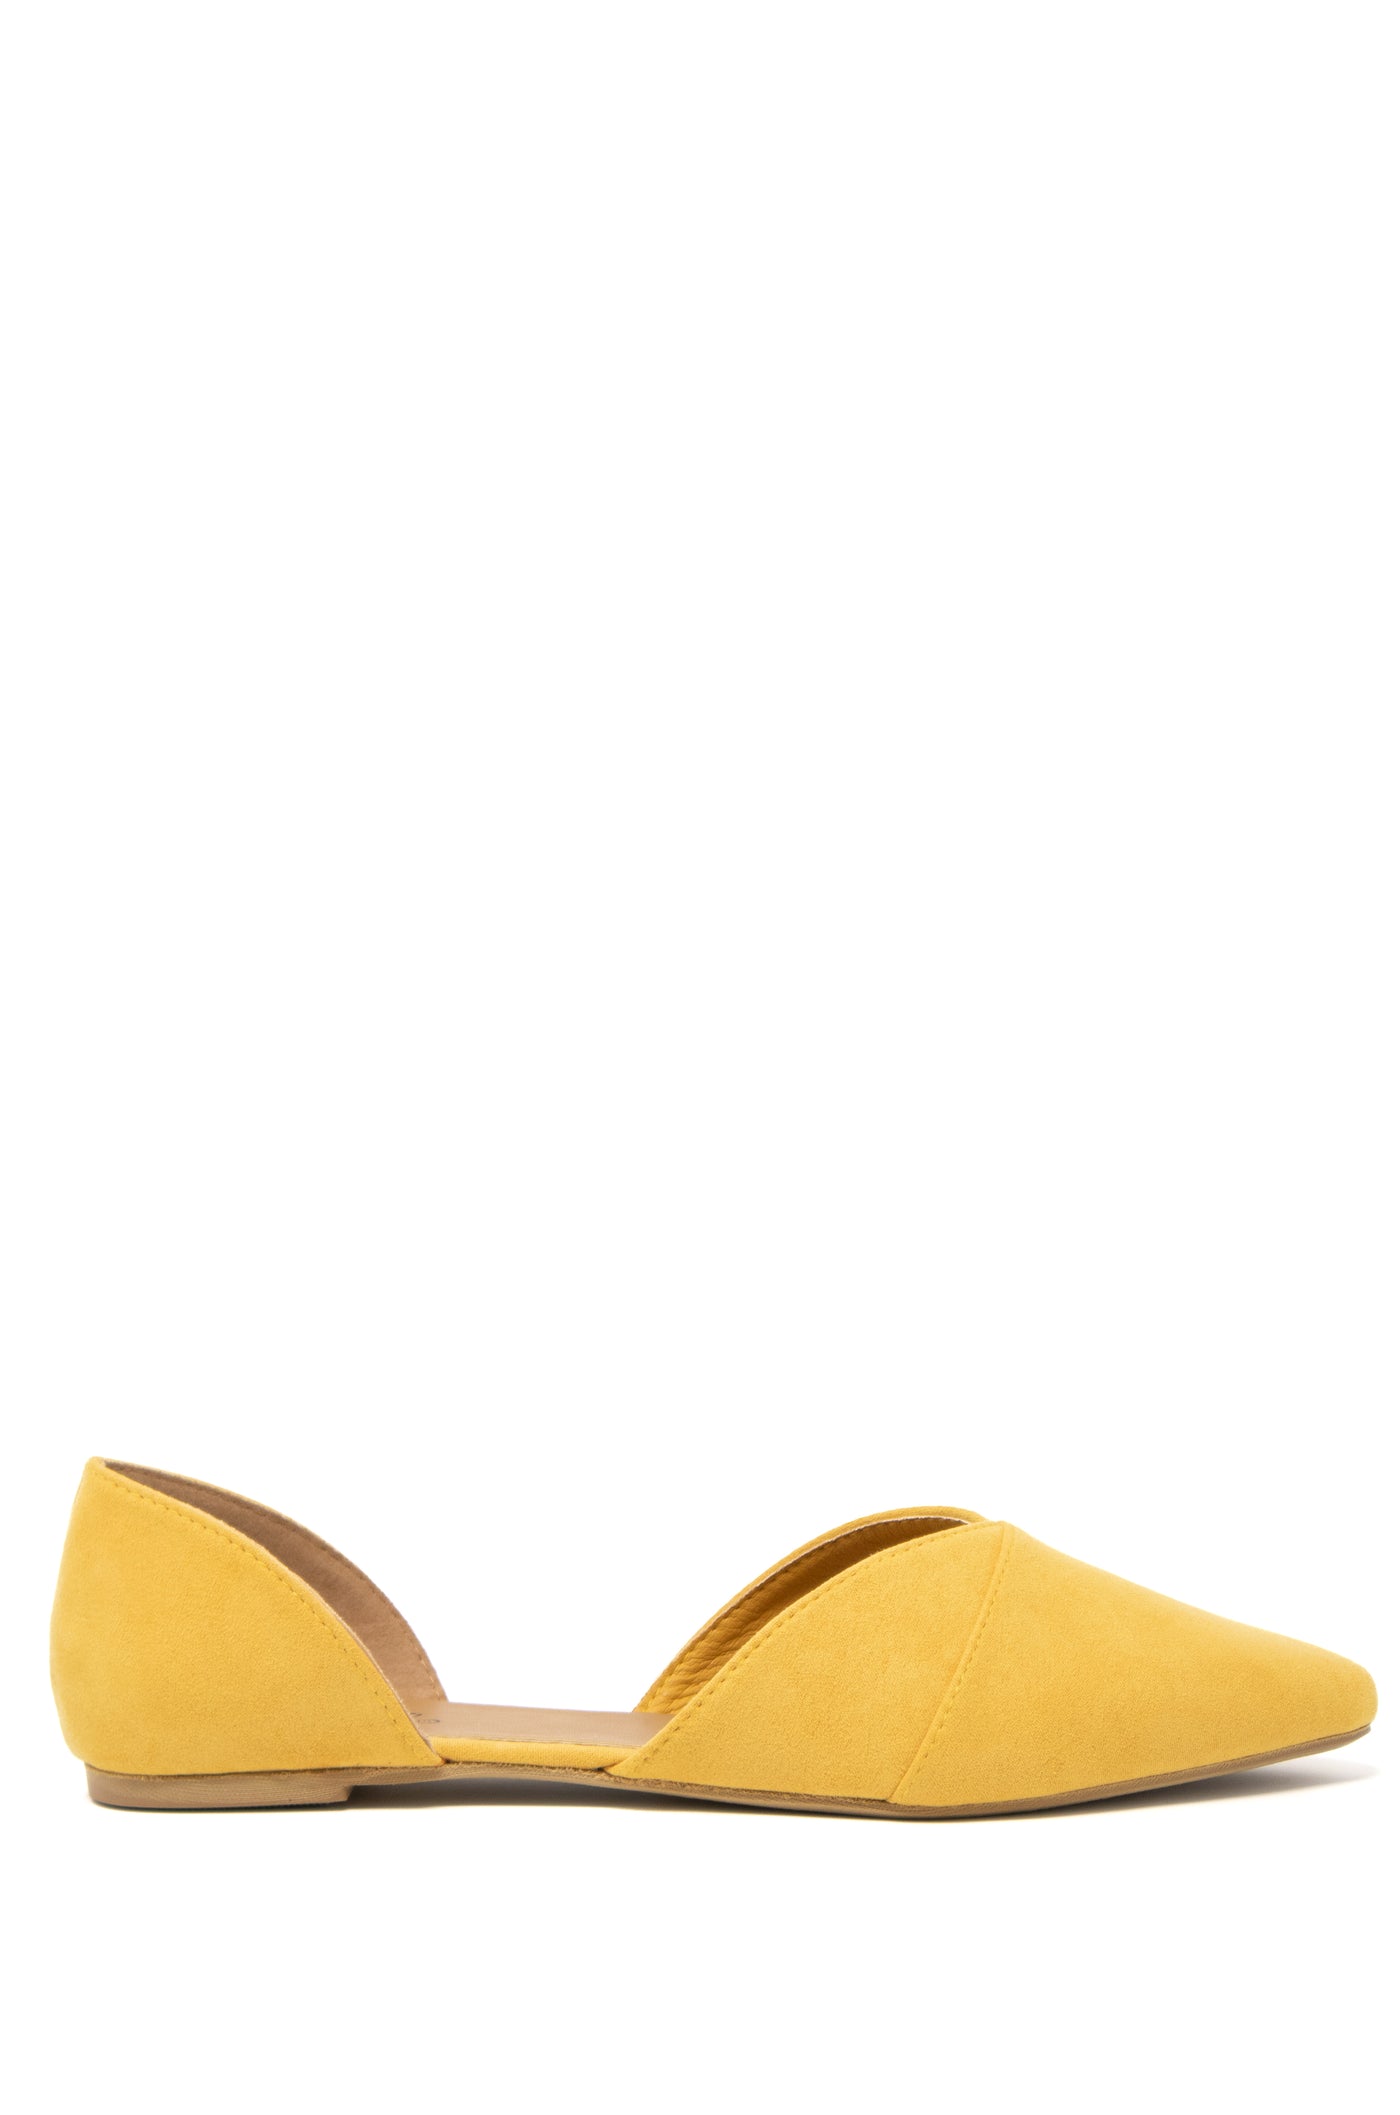 Meant To Be - Yellow D'Orsay Flats